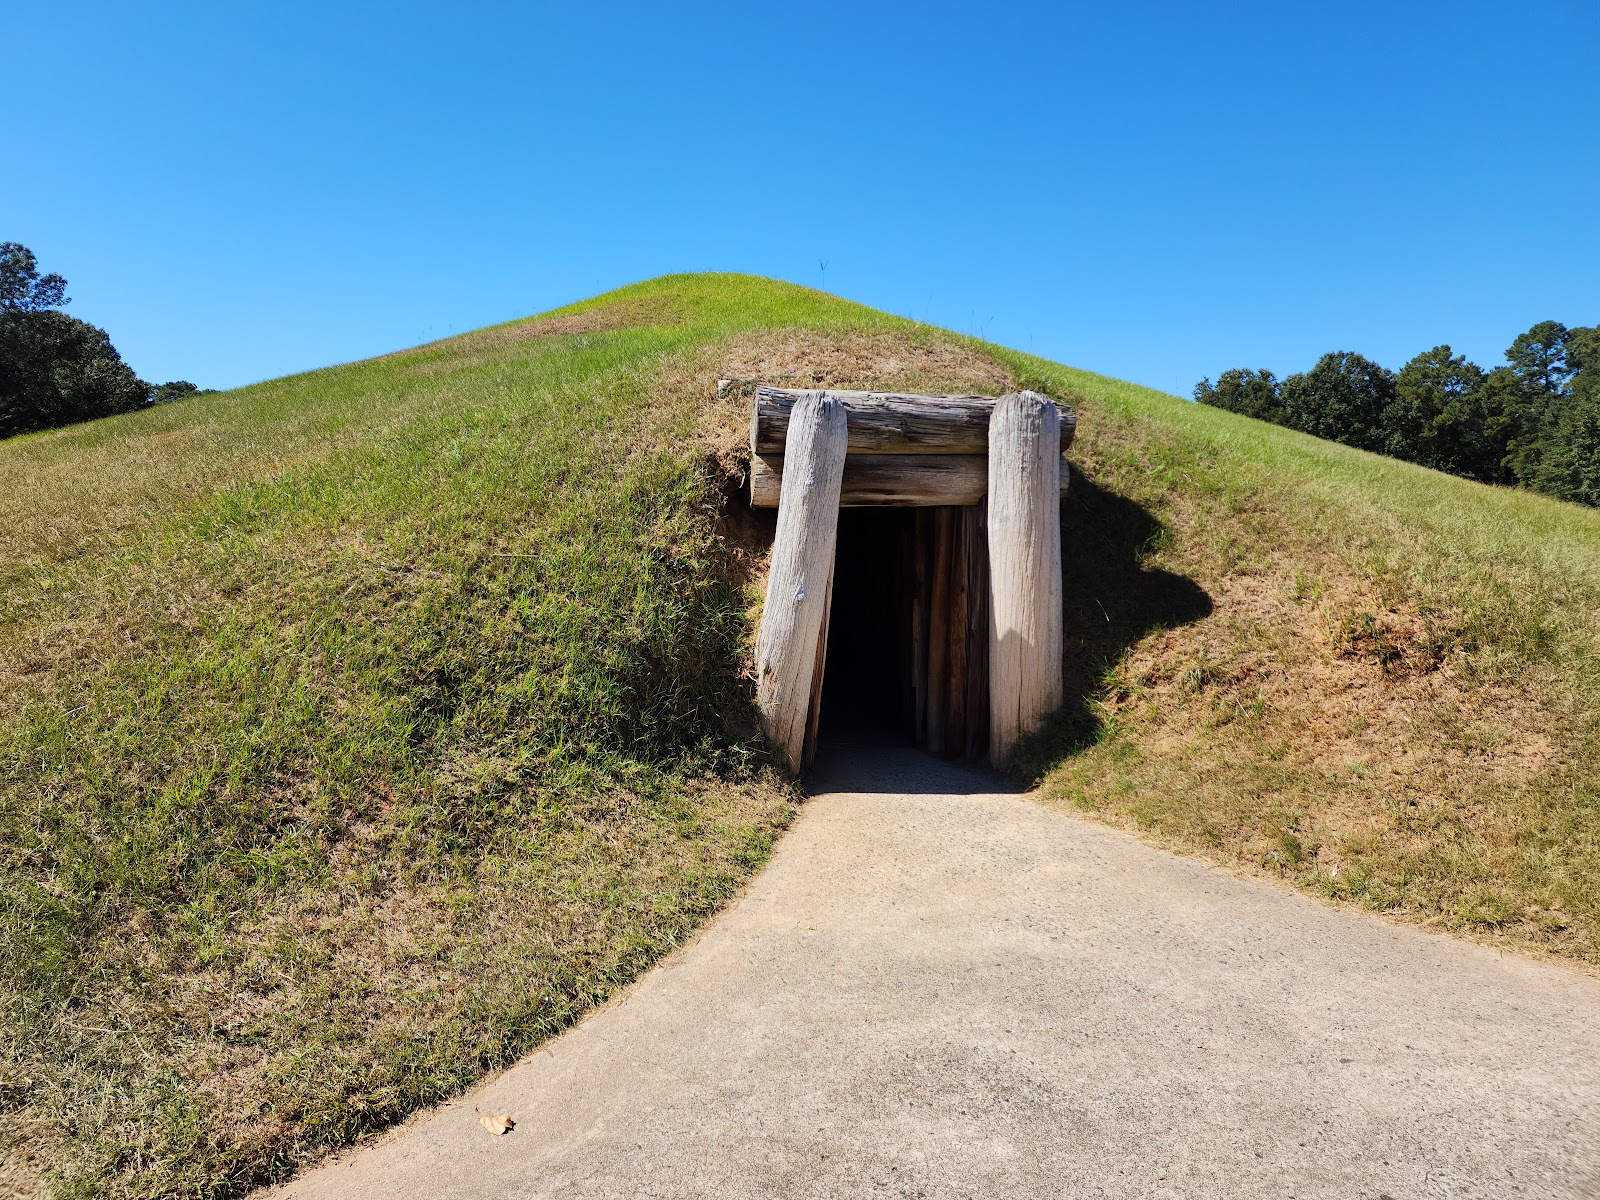 Ocmulgee Mounds National Historical Park